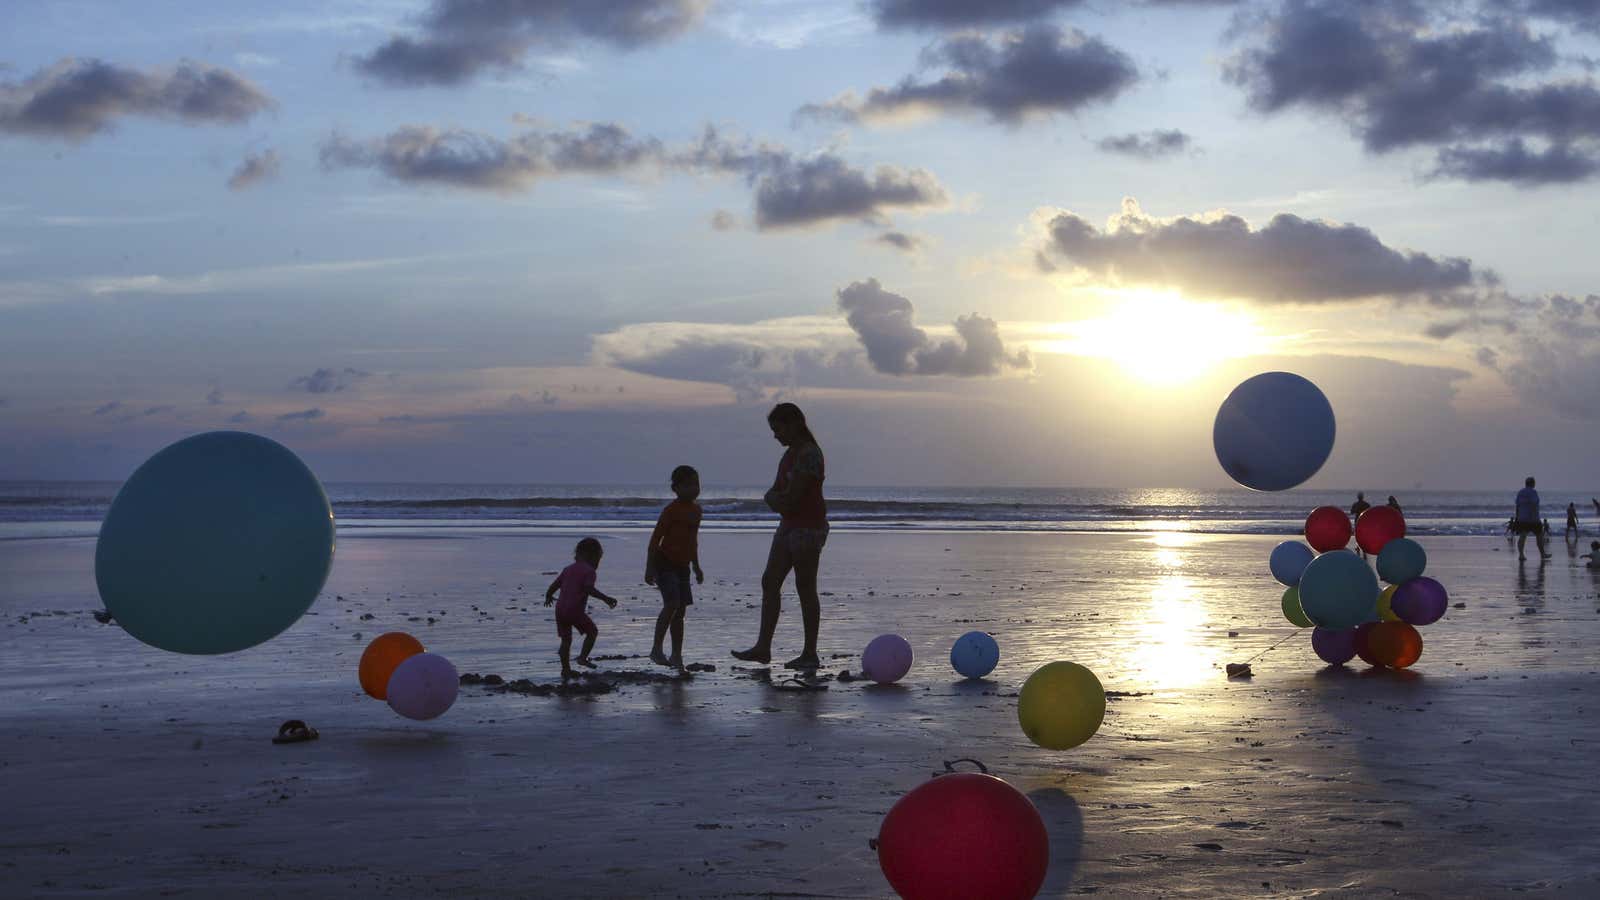 A mother plays with her children on the beach during sunset in Bali, Indonesia, Saturday, April 29, 2017. (AP Photo/Firdia Lisnawati)